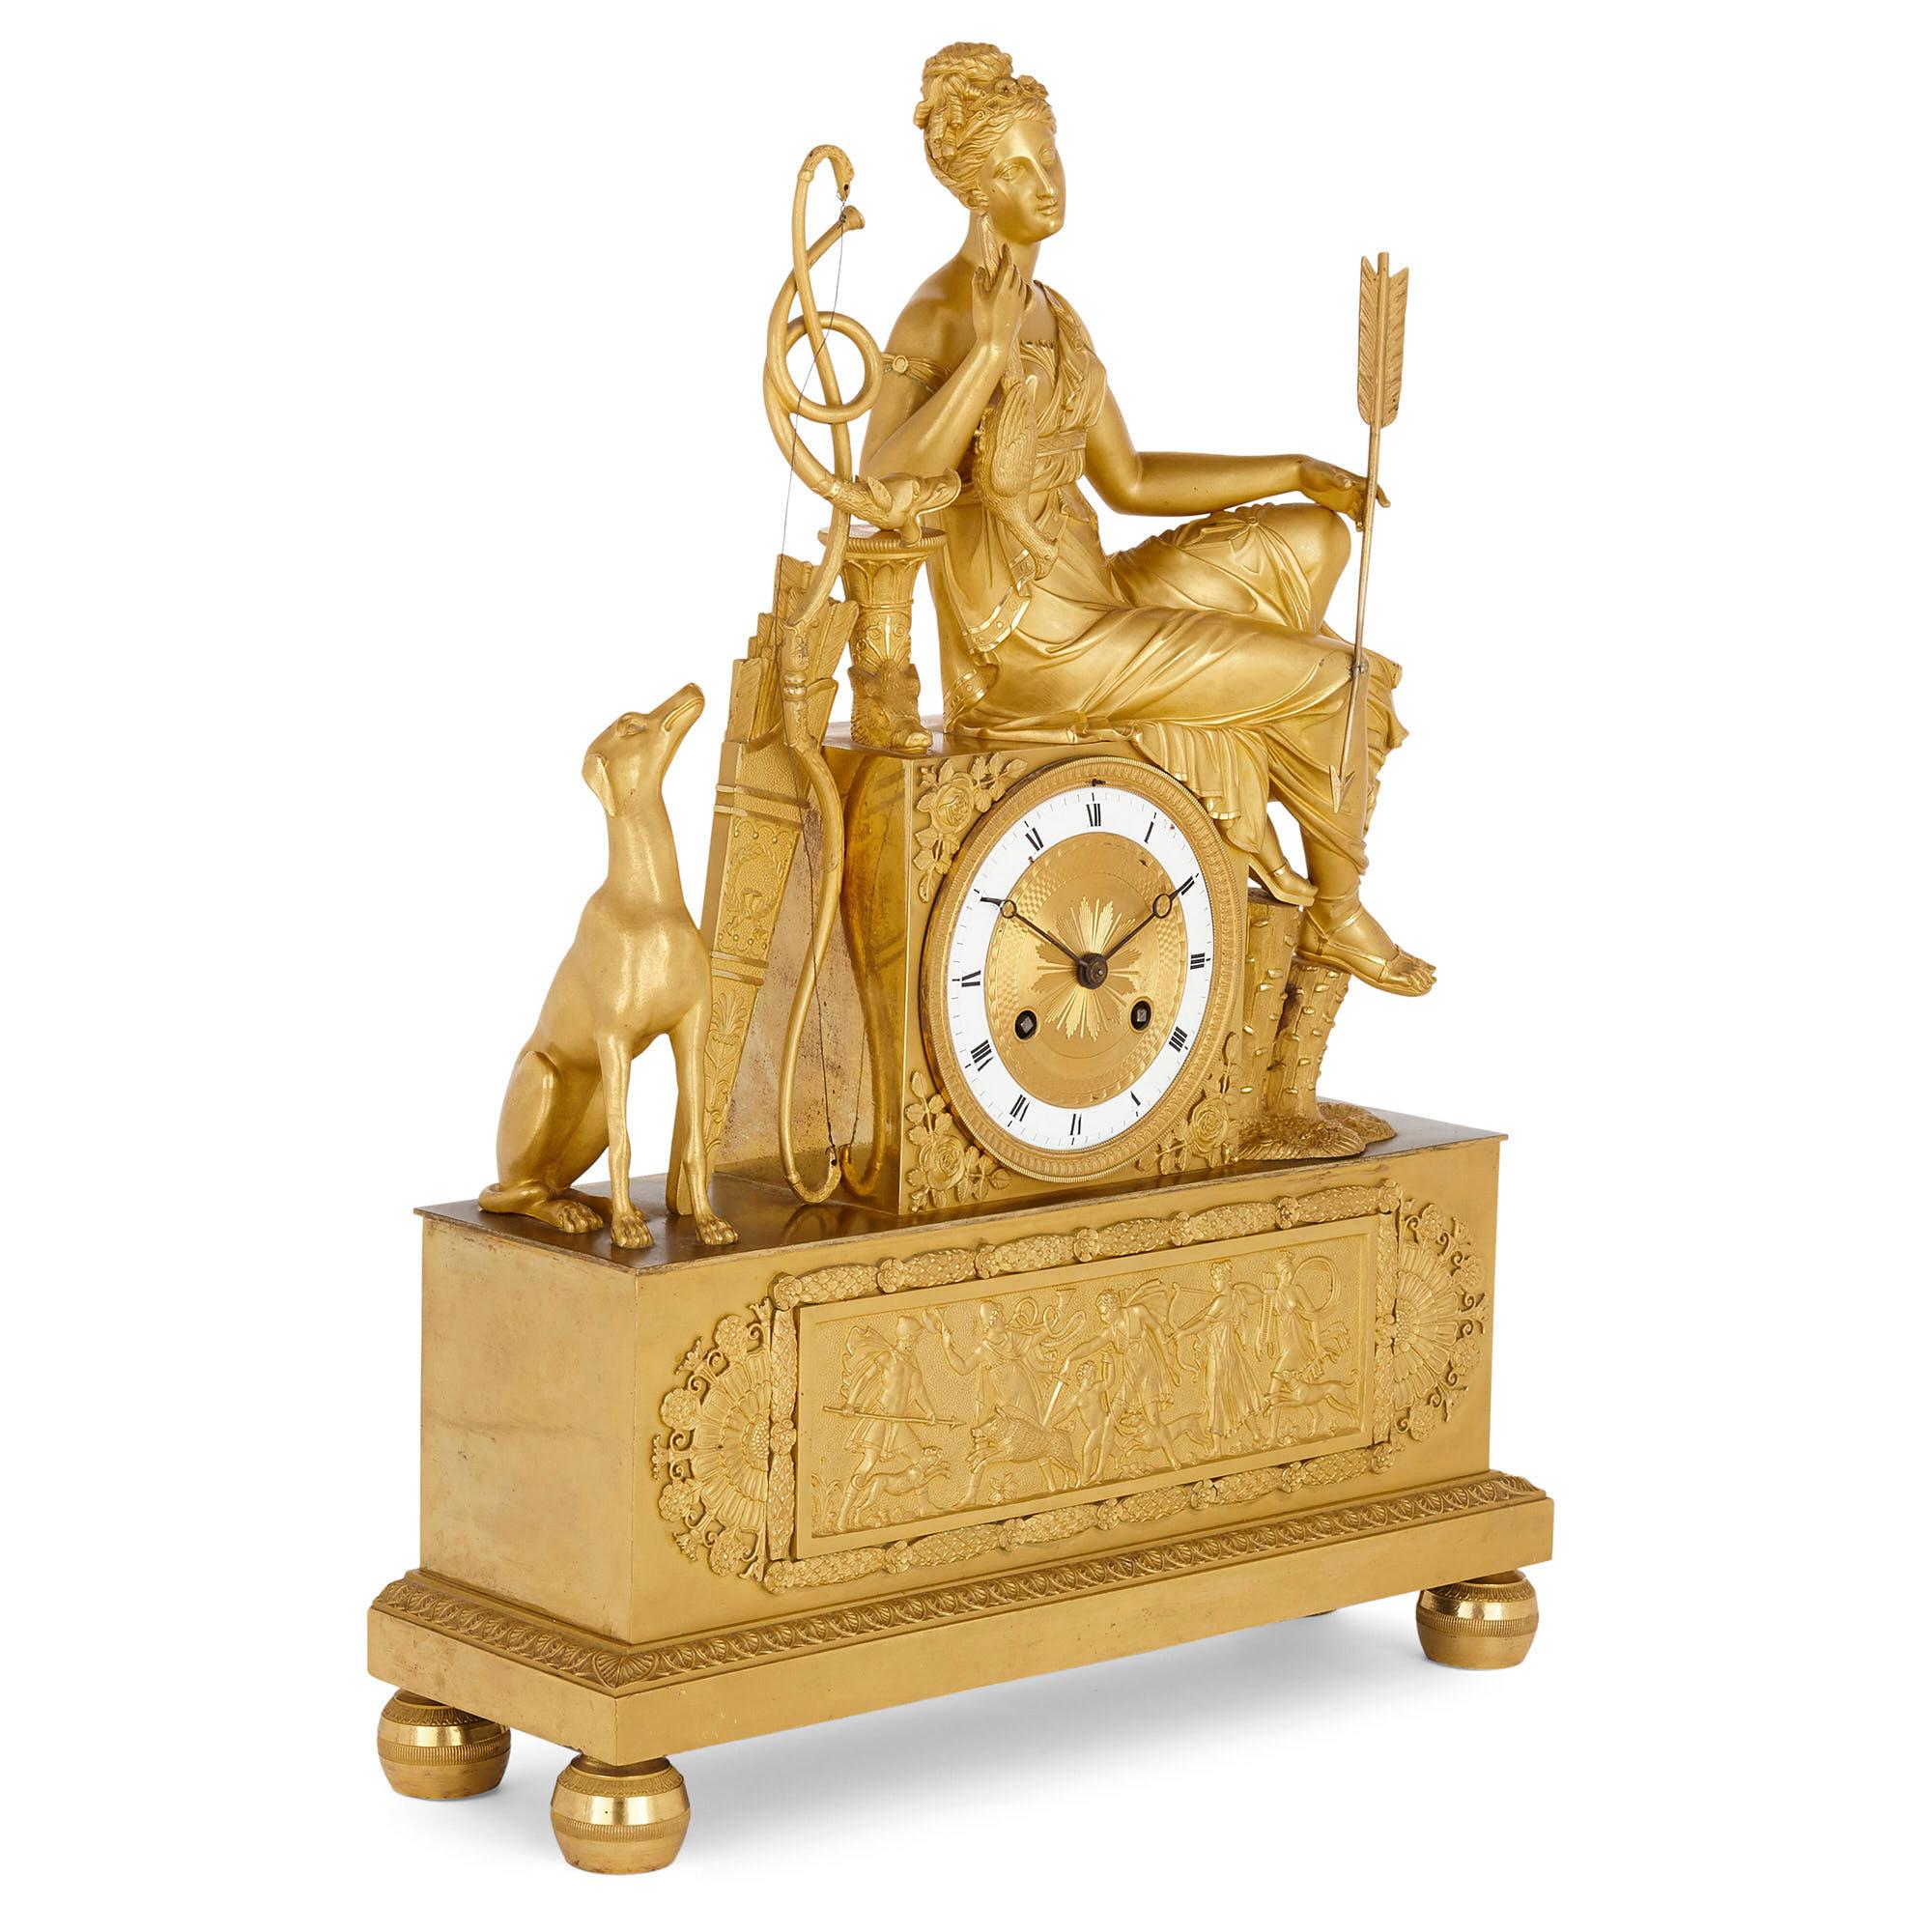 French Empire period gilt bronze mantel clock
French, early 19th century
Measures: Height 50cm, width 36cm, depth 12cm

This mantel clock, wrought from gilt bronze during the French Empire period, features a rectangular base, set above four bun